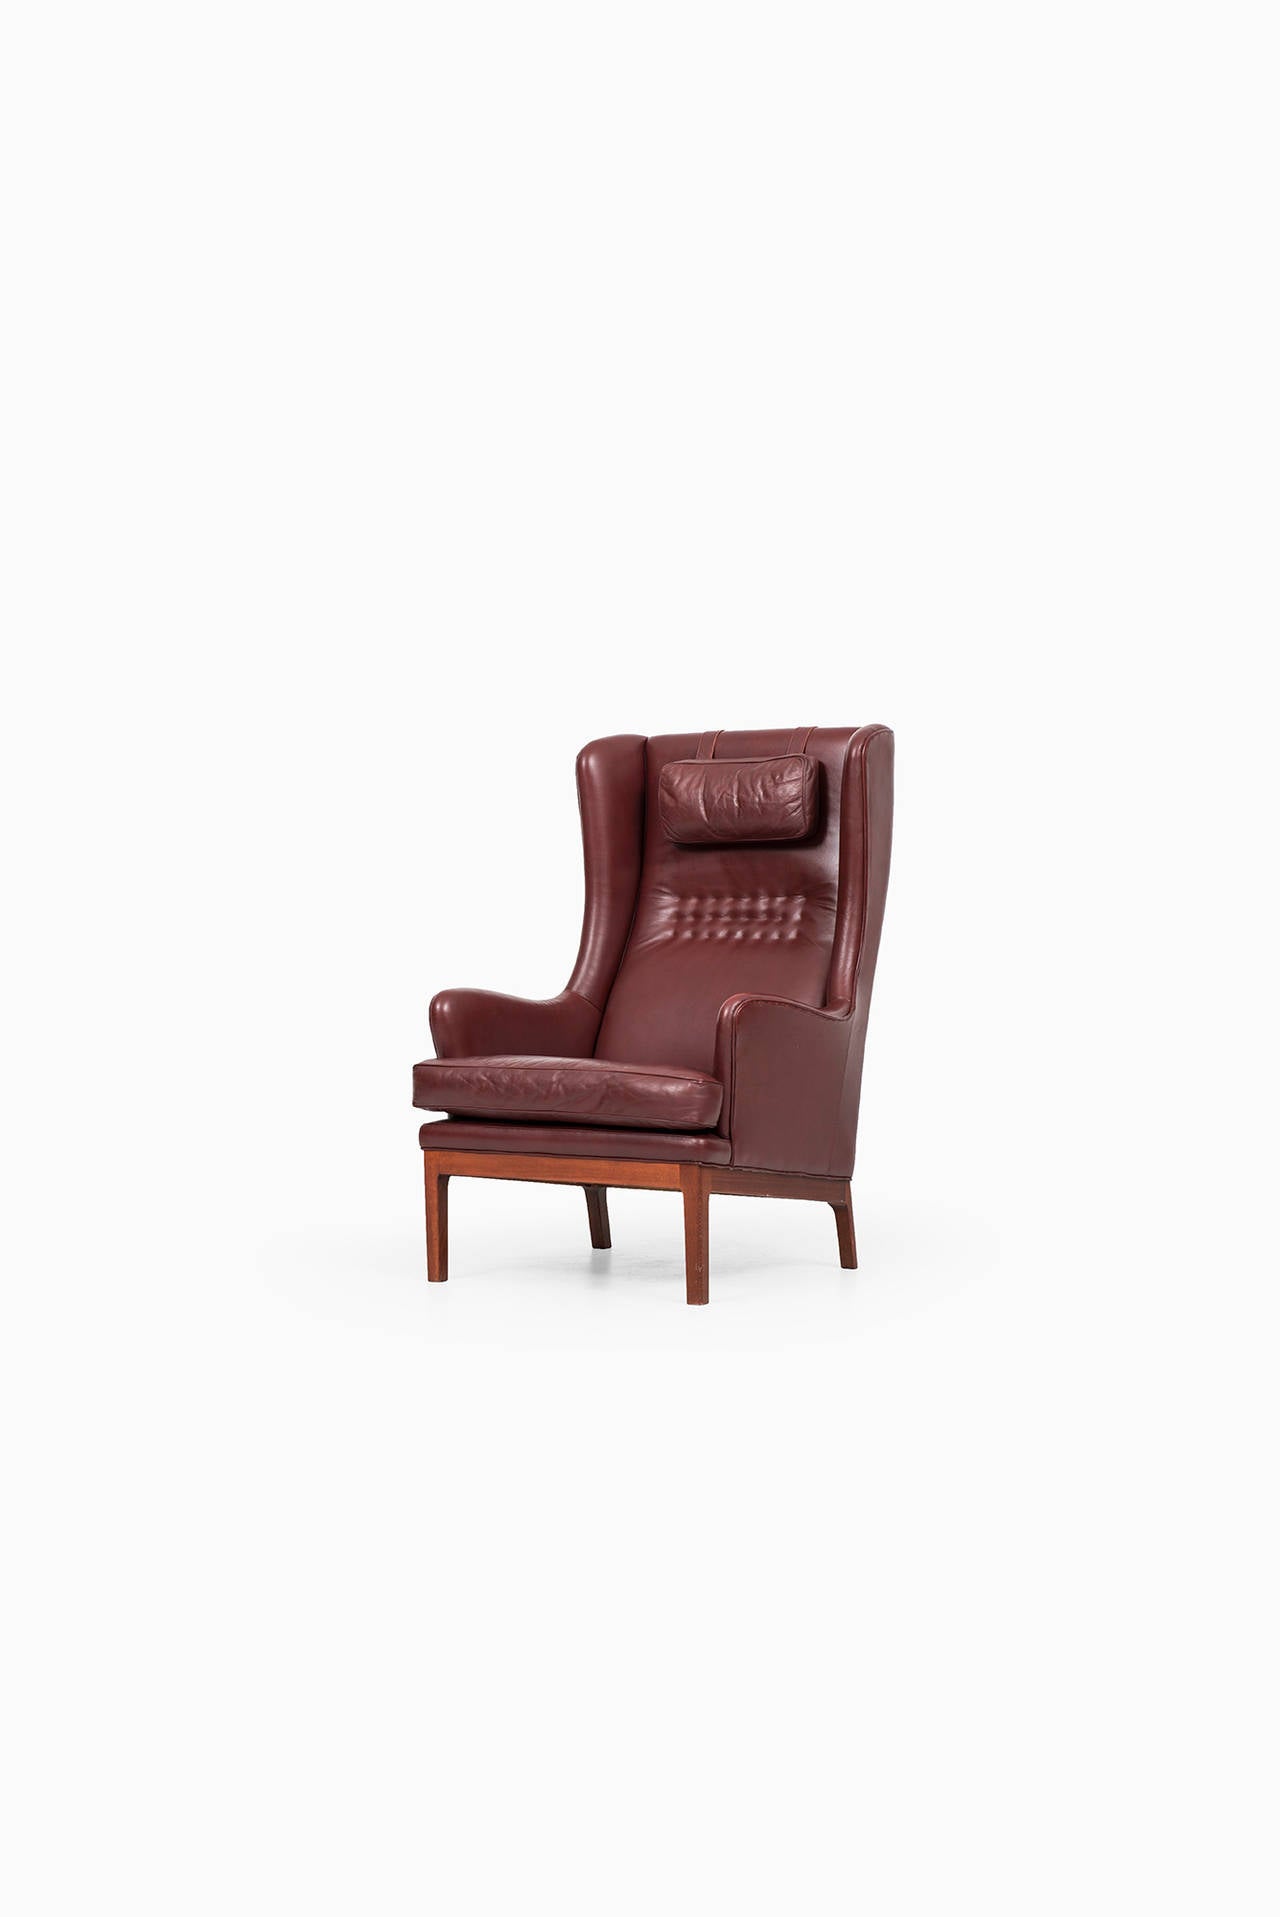 Swedish Arne Norell Wingback Easy Chairs in Dark Red Leather by Norell AB in Sweden